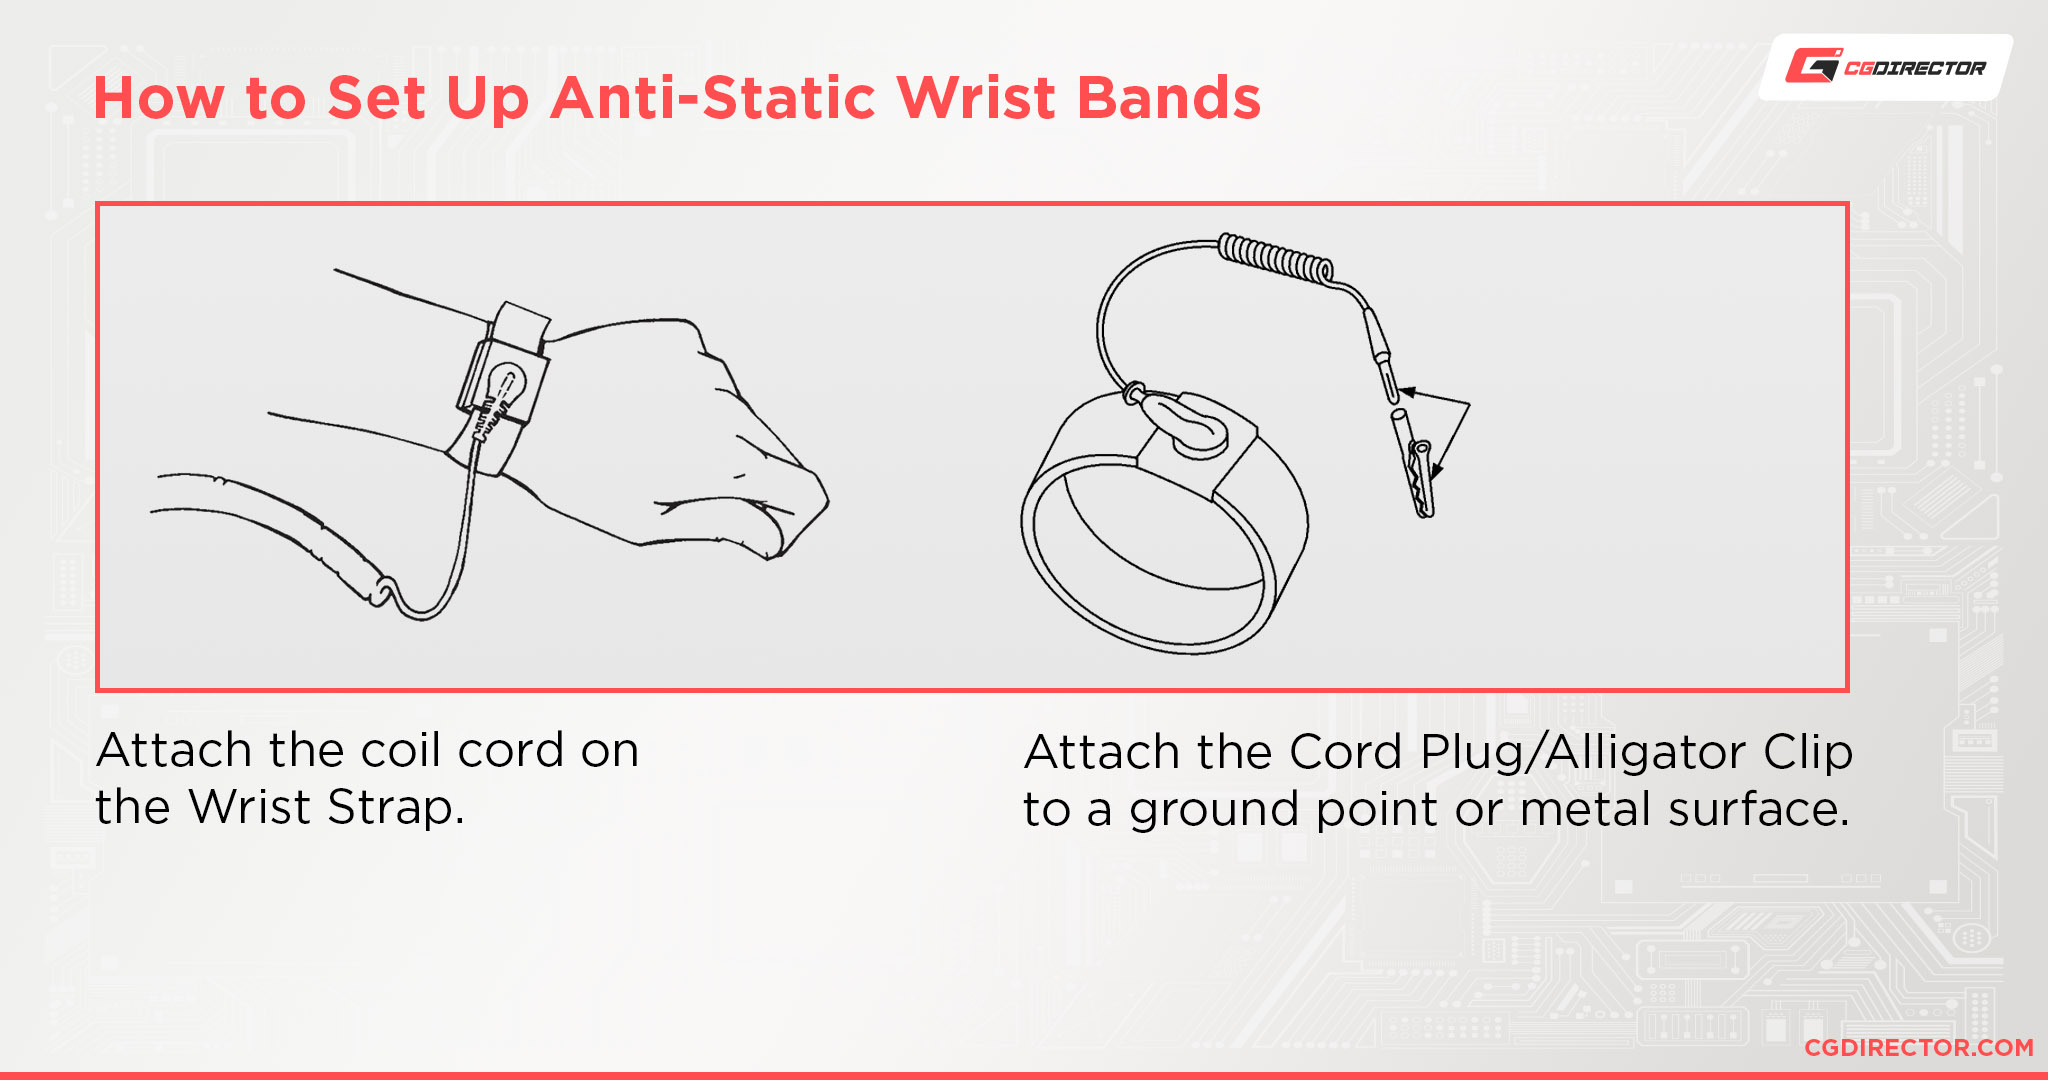 How to Set Up Anti-Static Wrist Bands